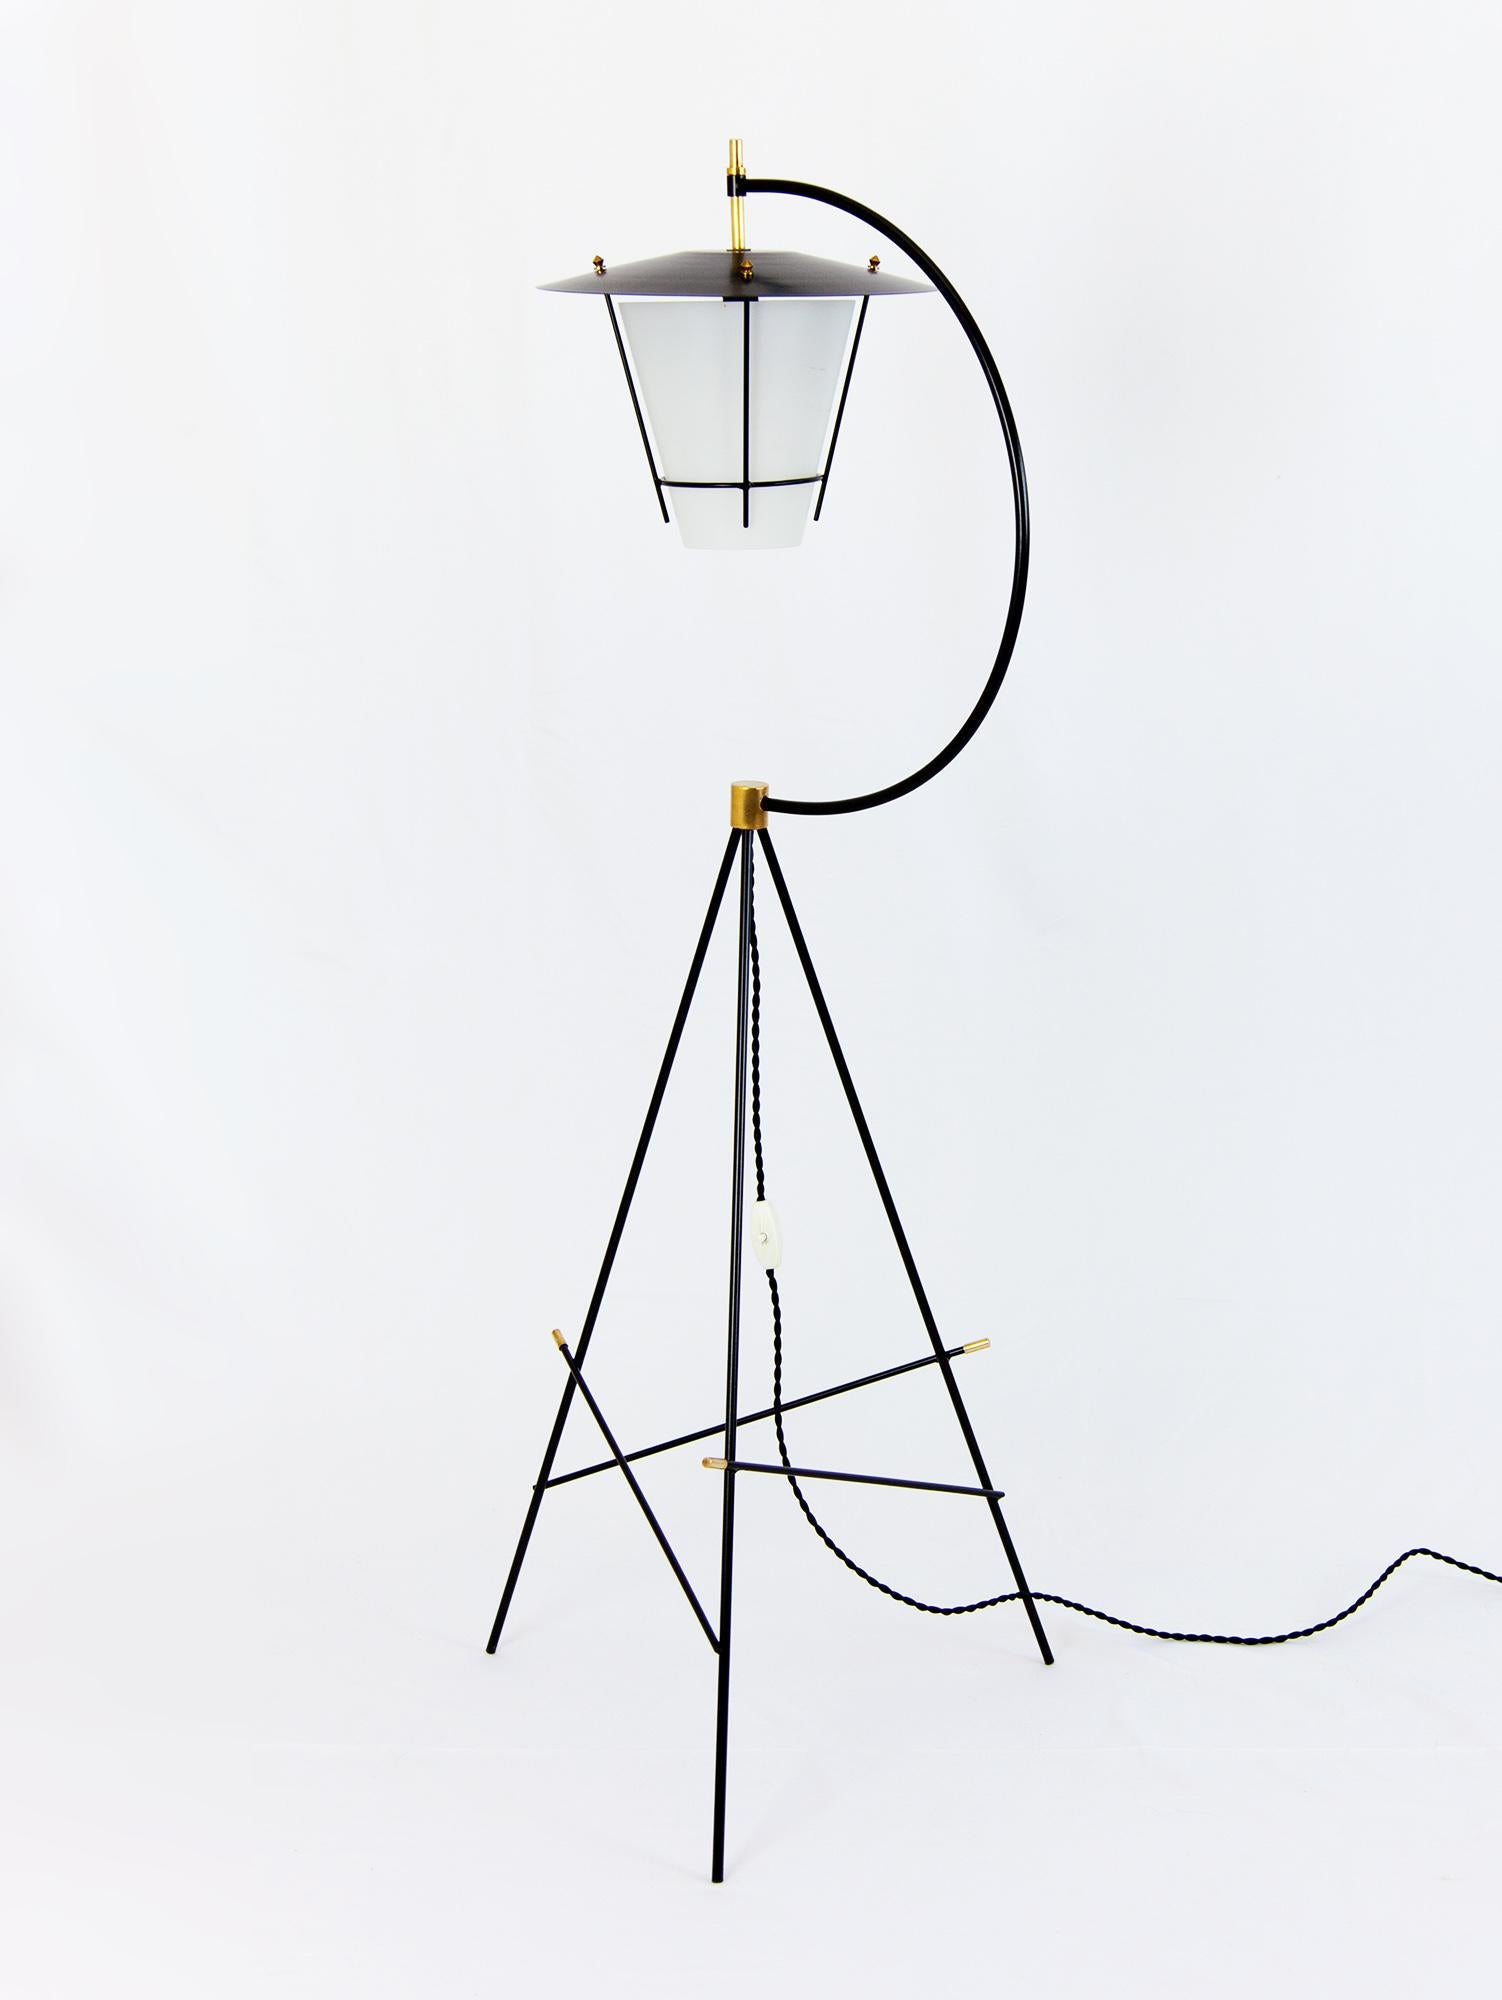 Stunning Italian tripod floor lamp with a solid black metal stand, satin glass shade and brass details. The lamp epitomises the 50s Italian aesthetic with a playful balance of angular lines and curves. Beautiful craftsmanship is seen throughout from